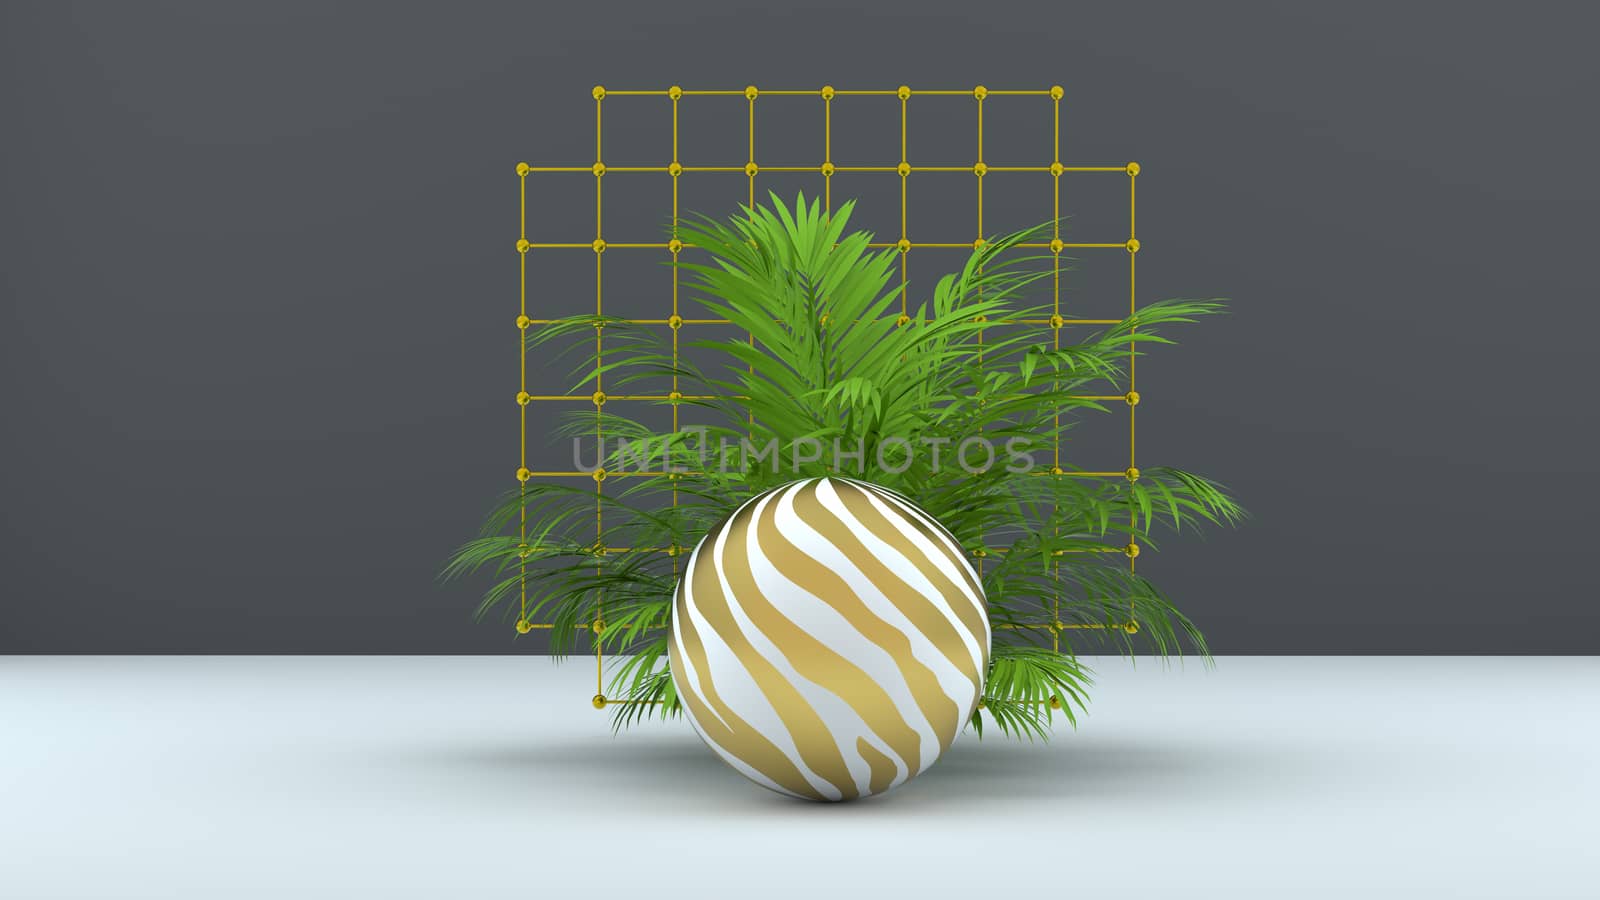 3d render abstract background with palm leaves, sphere and golden grid. Modern minimal design. Trendy background for product design or text presentation. Memphis design style.